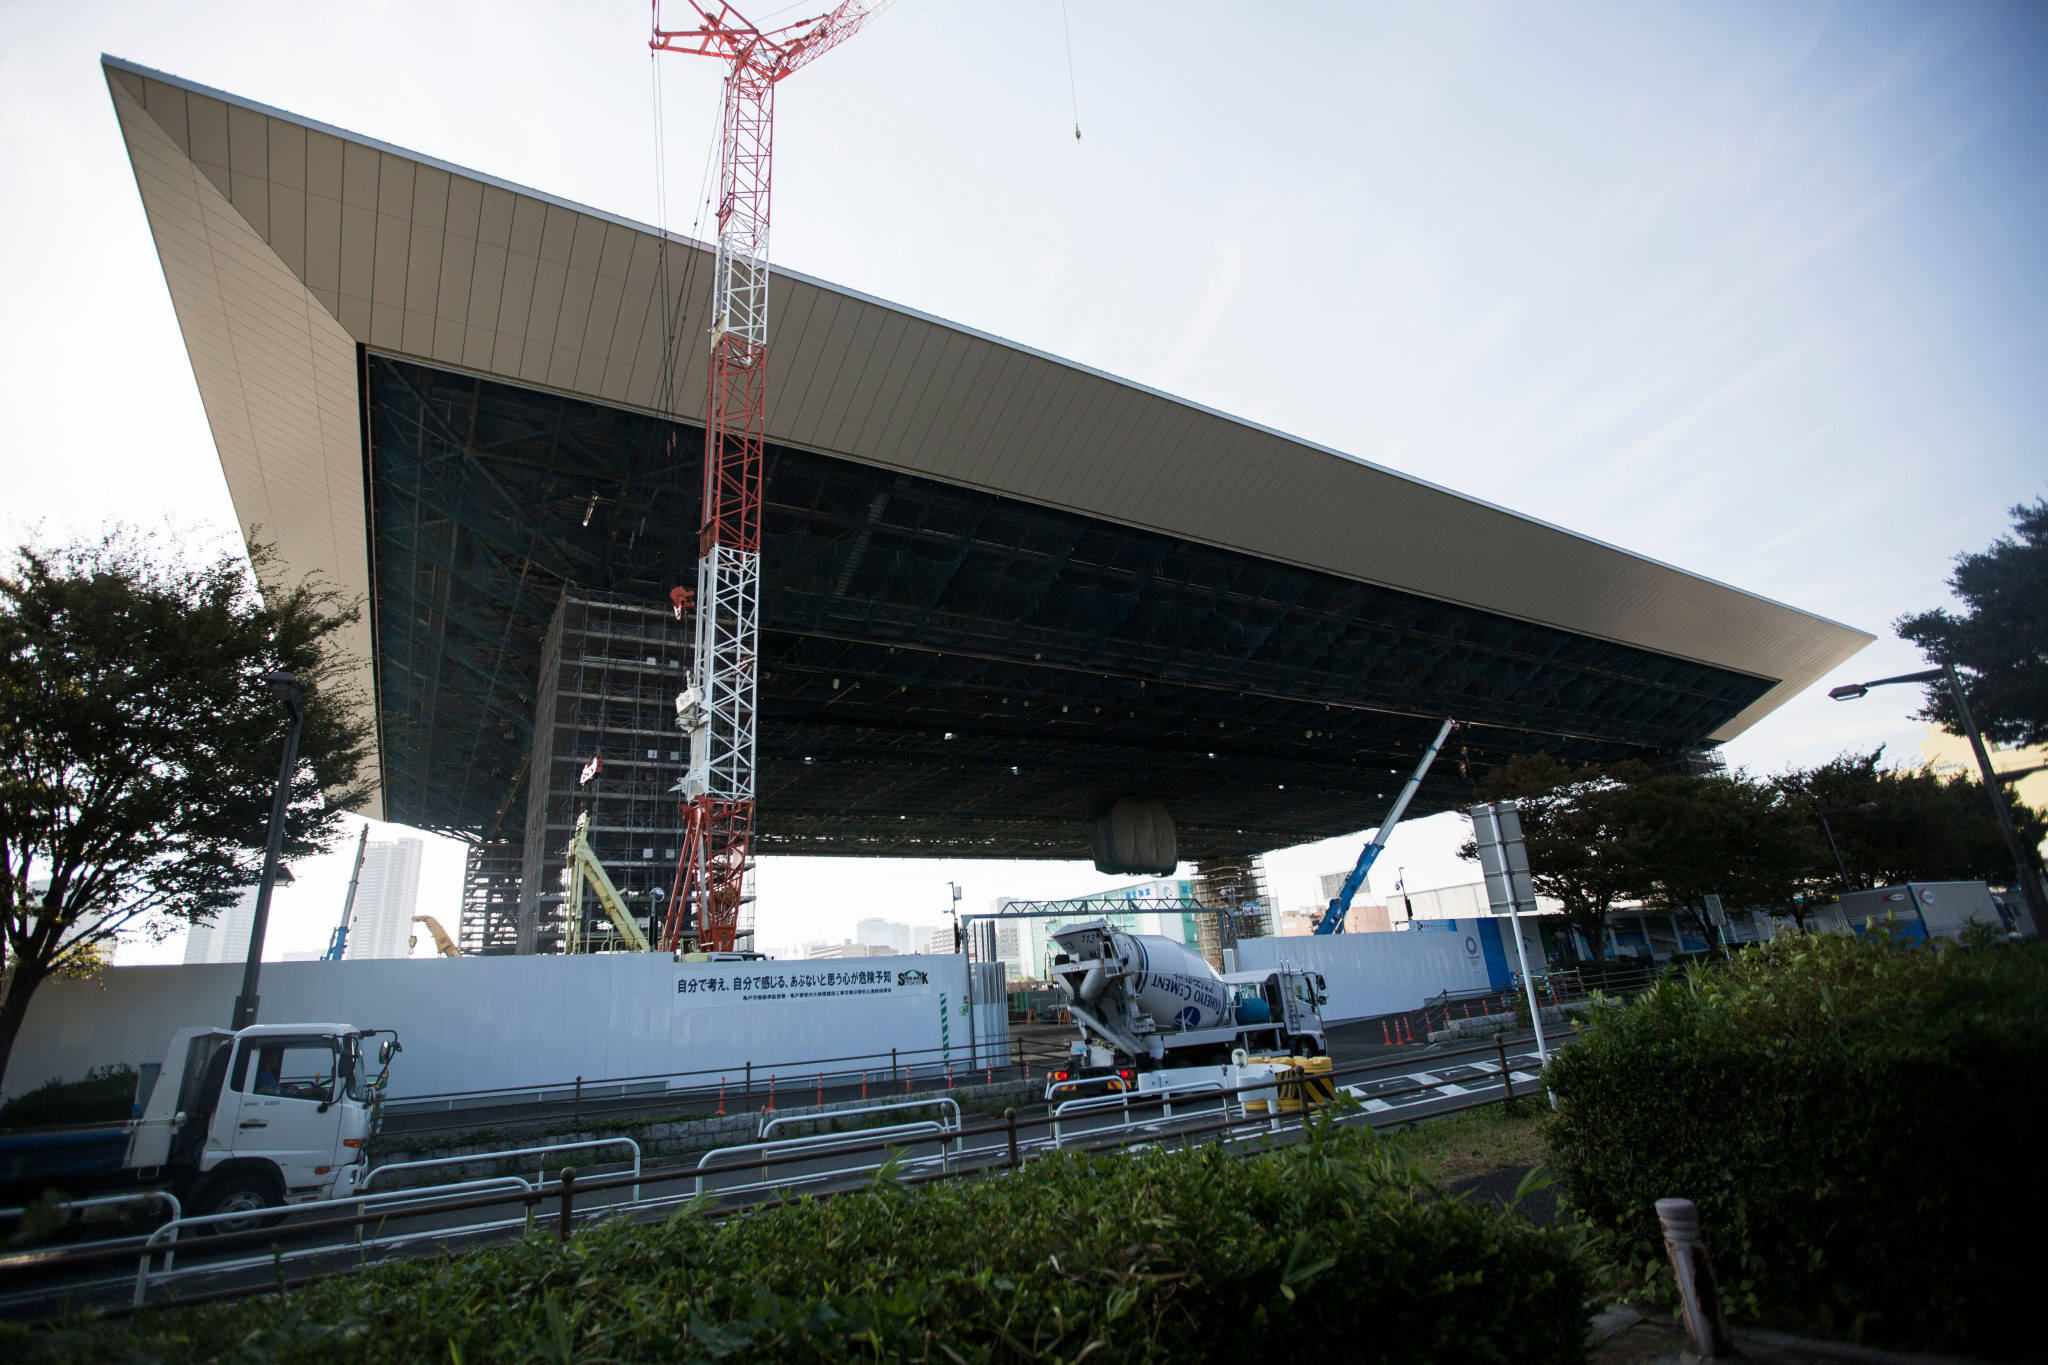 The construction of venues for the Tokyo 2020 Olympic and Paralympic Games is experiencing difficulties, with the company responsible for the construction of the Olympic Aquatics Centre admitting that they manipulated earthquake safety data ©Getty Images